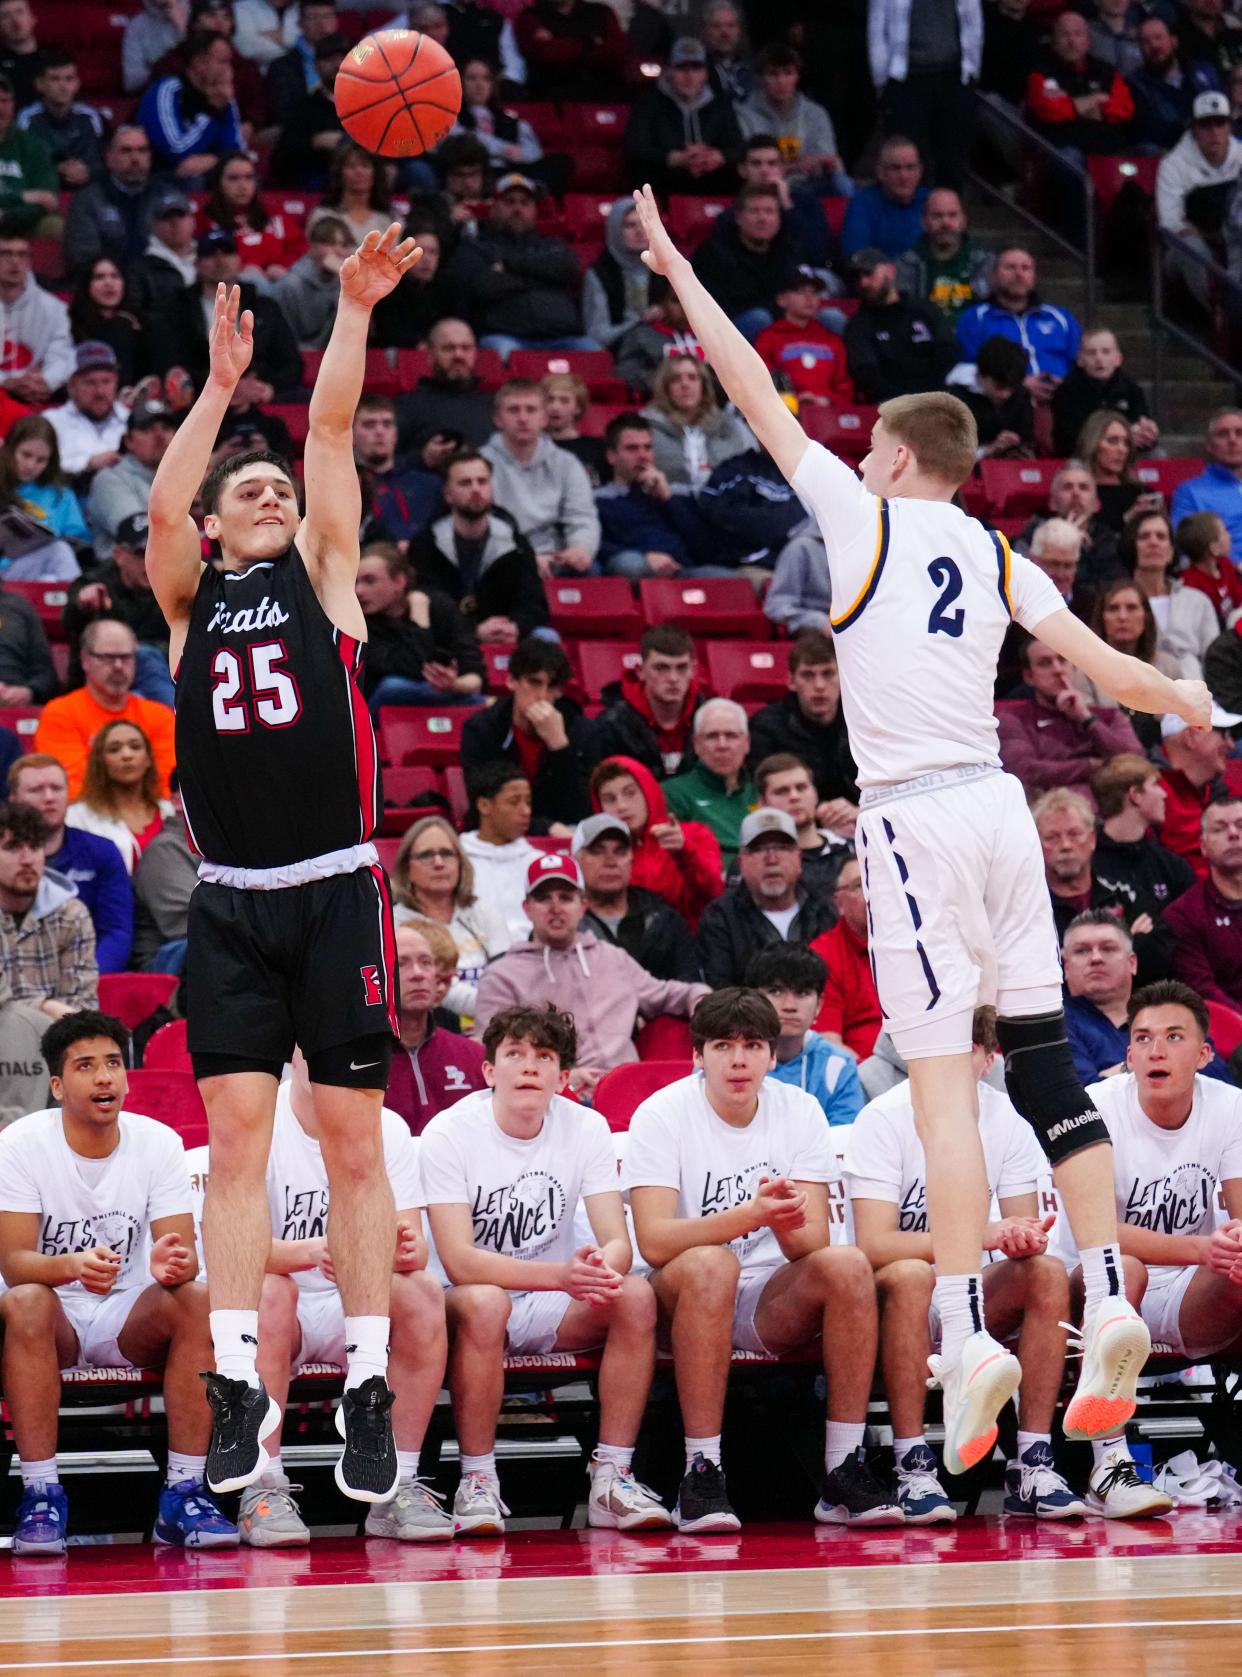 Pewaukee's Nick Janowski (25) goes up for three during the WIAA Division 2 state boys basketball championship against Whitnall at the Kohl Center in Madison on Saturday, March 18, 2023.